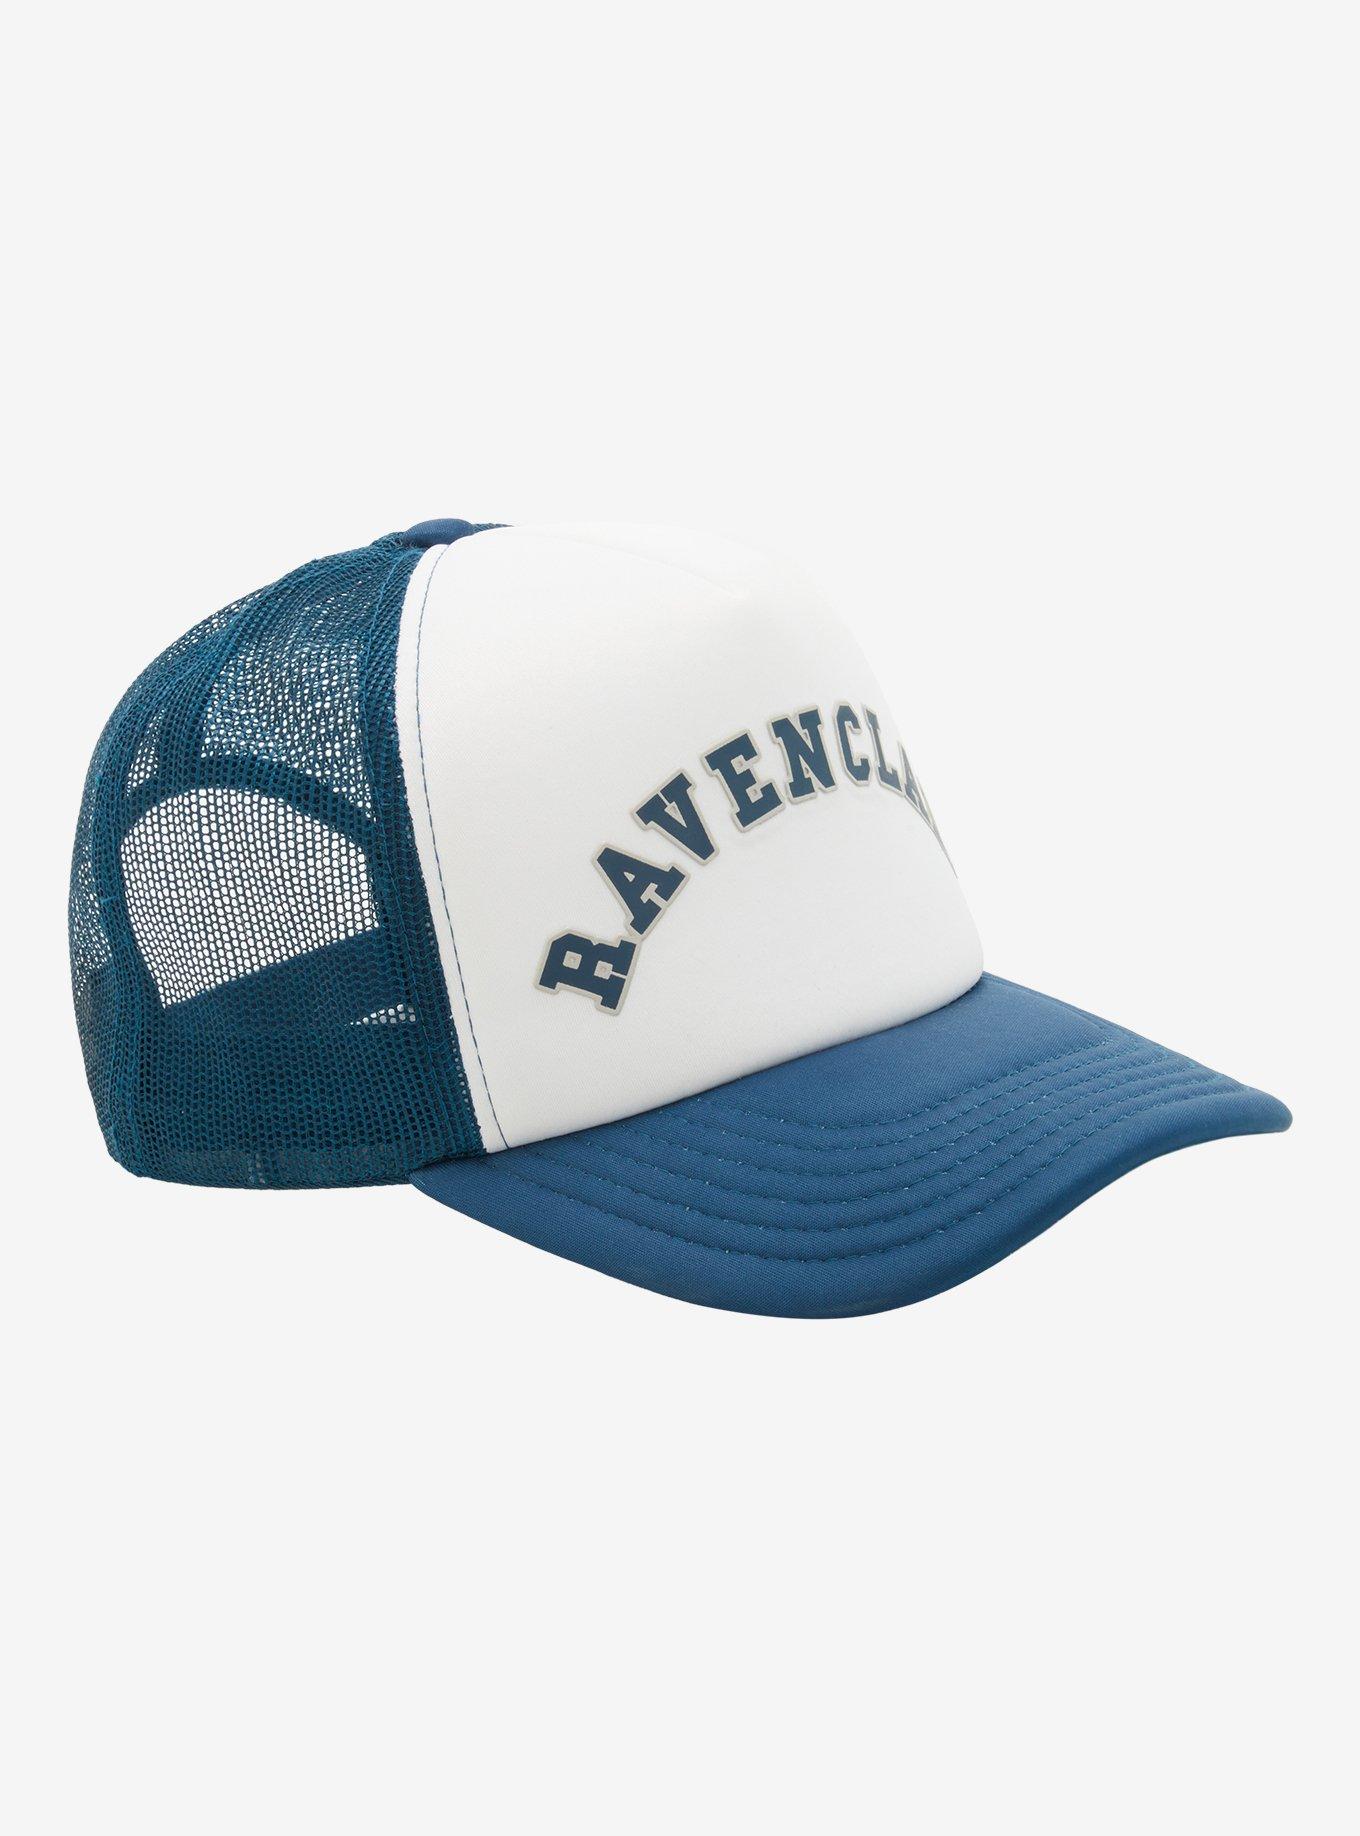 Harry Potter Ravenclaw Collegiate Trucker Cap - BoxLunch Exclusive |  BoxLunch